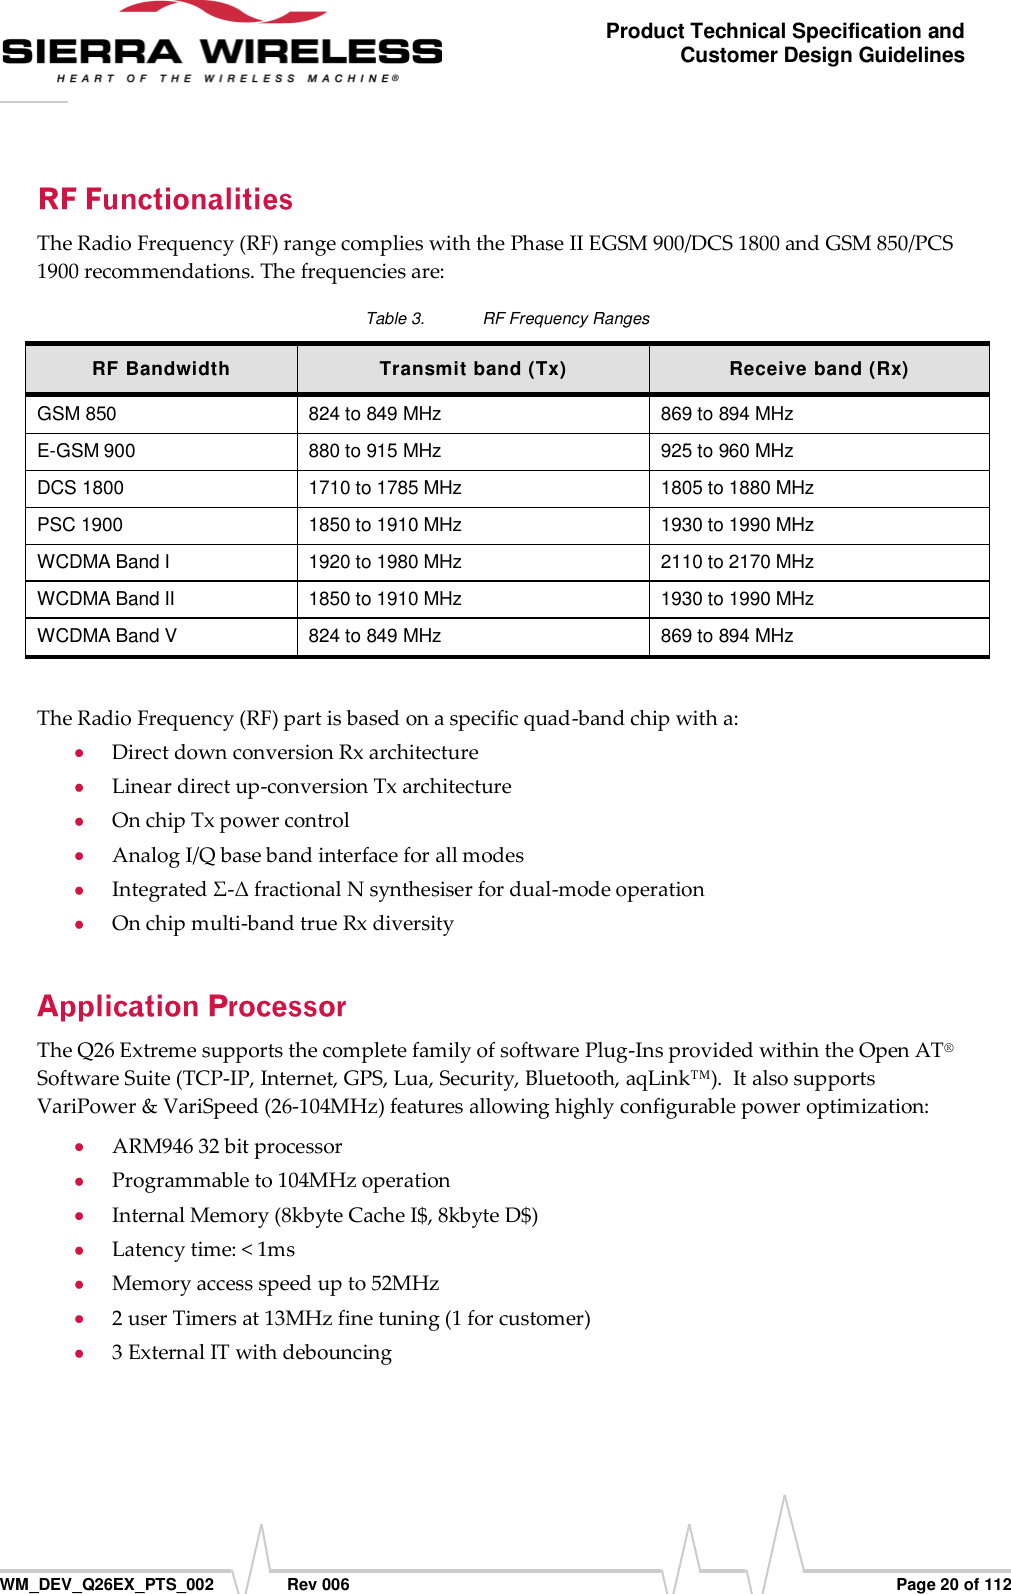      WM_DEV_Q26EX_PTS_002  Rev 006  Page 20 of 112 Product Technical Specification and Customer Design Guidelines The Radio Frequency (RF) range complies with the Phase II EGSM 900/DCS 1800 and GSM 850/PCS 1900 recommendations. The frequencies are: Table 3.  RF Frequency Ranges RF Bandwidth Transmit band (Tx) Receive band (Rx) GSM 850 824 to 849 MHz 869 to 894 MHz E-GSM 900 880 to 915 MHz 925 to 960 MHz DCS 1800 1710 to 1785 MHz 1805 to 1880 MHz PSC 1900 1850 to 1910 MHz 1930 to 1990 MHz WCDMA Band I 1920 to 1980 MHz 2110 to 2170 MHz WCDMA Band II 1850 to 1910 MHz 1930 to 1990 MHz WCDMA Band V 824 to 849 MHz 869 to 894 MHz  The Radio Frequency (RF) part is based on a specific quad-band chip with a:  Direct down conversion Rx architecture  Linear direct up-conversion Tx architecture  On chip Tx power control  Analog I/Q base band interface for all modes  Integrated Σ-Δ fractional N synthesiser for dual-mode operation   On chip multi-band true Rx diversity The Q26 Extreme supports the complete family of software Plug-Ins provided within the Open AT® Software Suite (TCP-IP, Internet, GPS, Lua, Security, Bluetooth, aqLink™).  It also supports VariPower &amp; VariSpeed (26-104MHz) features allowing highly configurable power optimization:  ARM946 32 bit processor   Programmable to 104MHz operation  Internal Memory (8kbyte Cache I$, 8kbyte D$)  Latency time: &lt; 1ms  Memory access speed up to 52MHz  2 user Timers at 13MHz fine tuning (1 for customer)  3 External IT with debouncing 